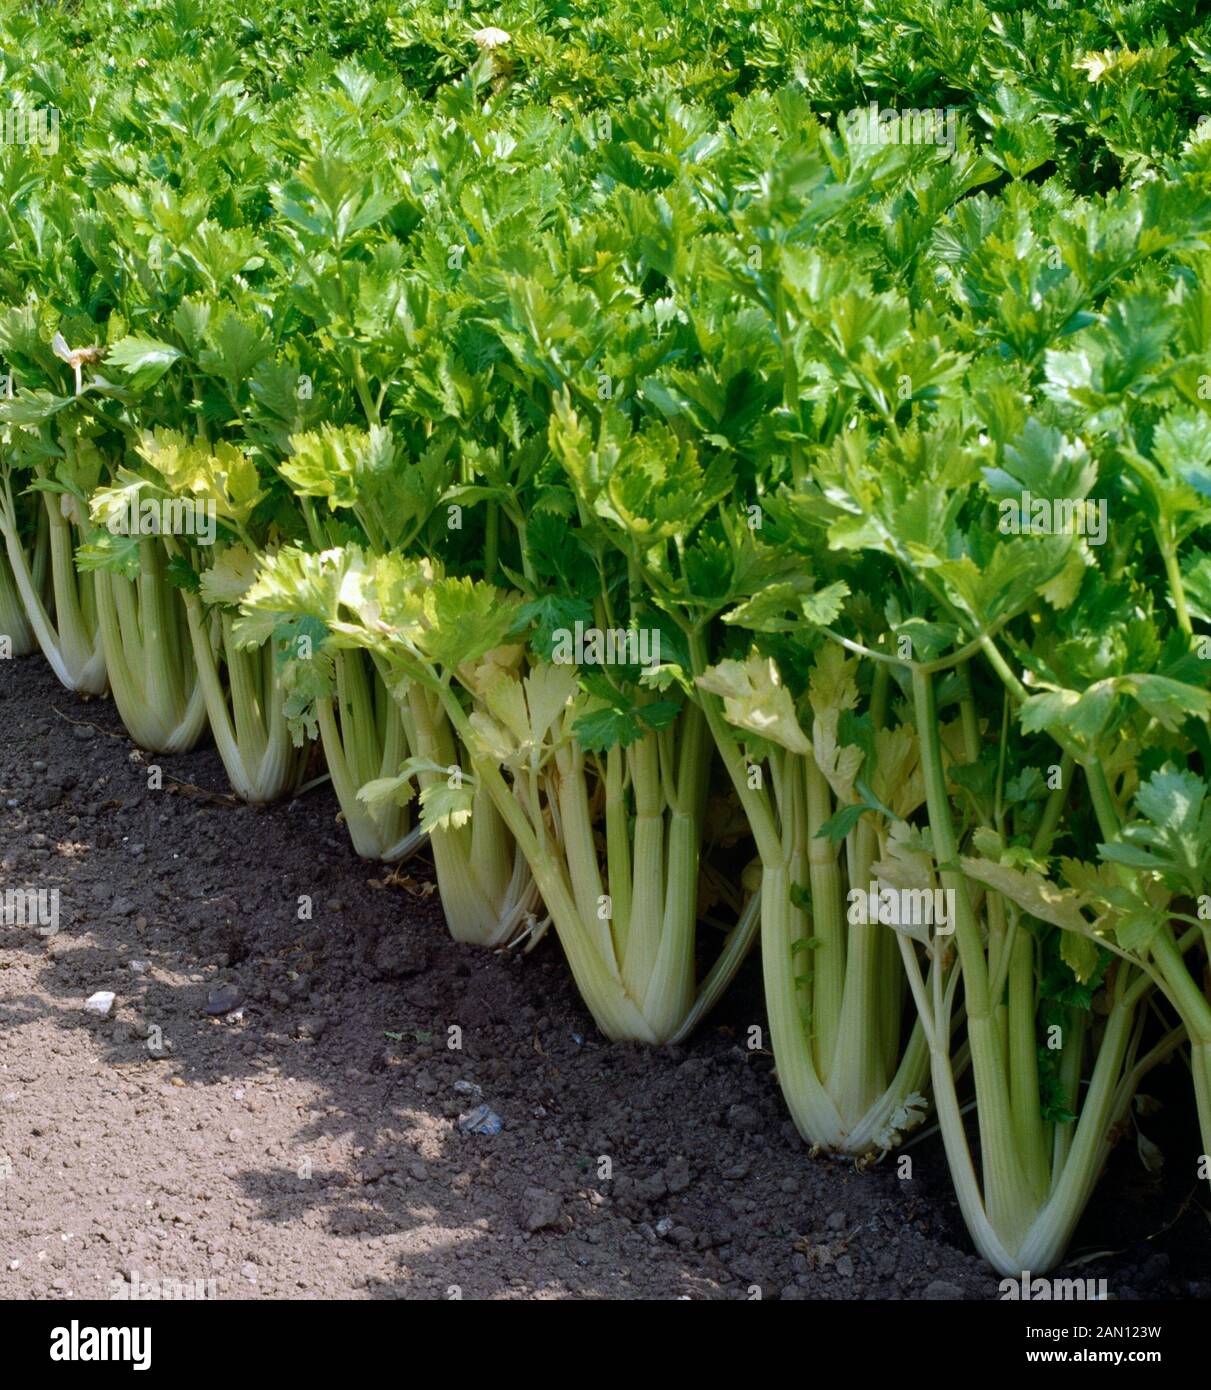 SELF BLANCHING CELERY IN CULTIVATION  (APIUM GRAVEOLENS) Stock Photo